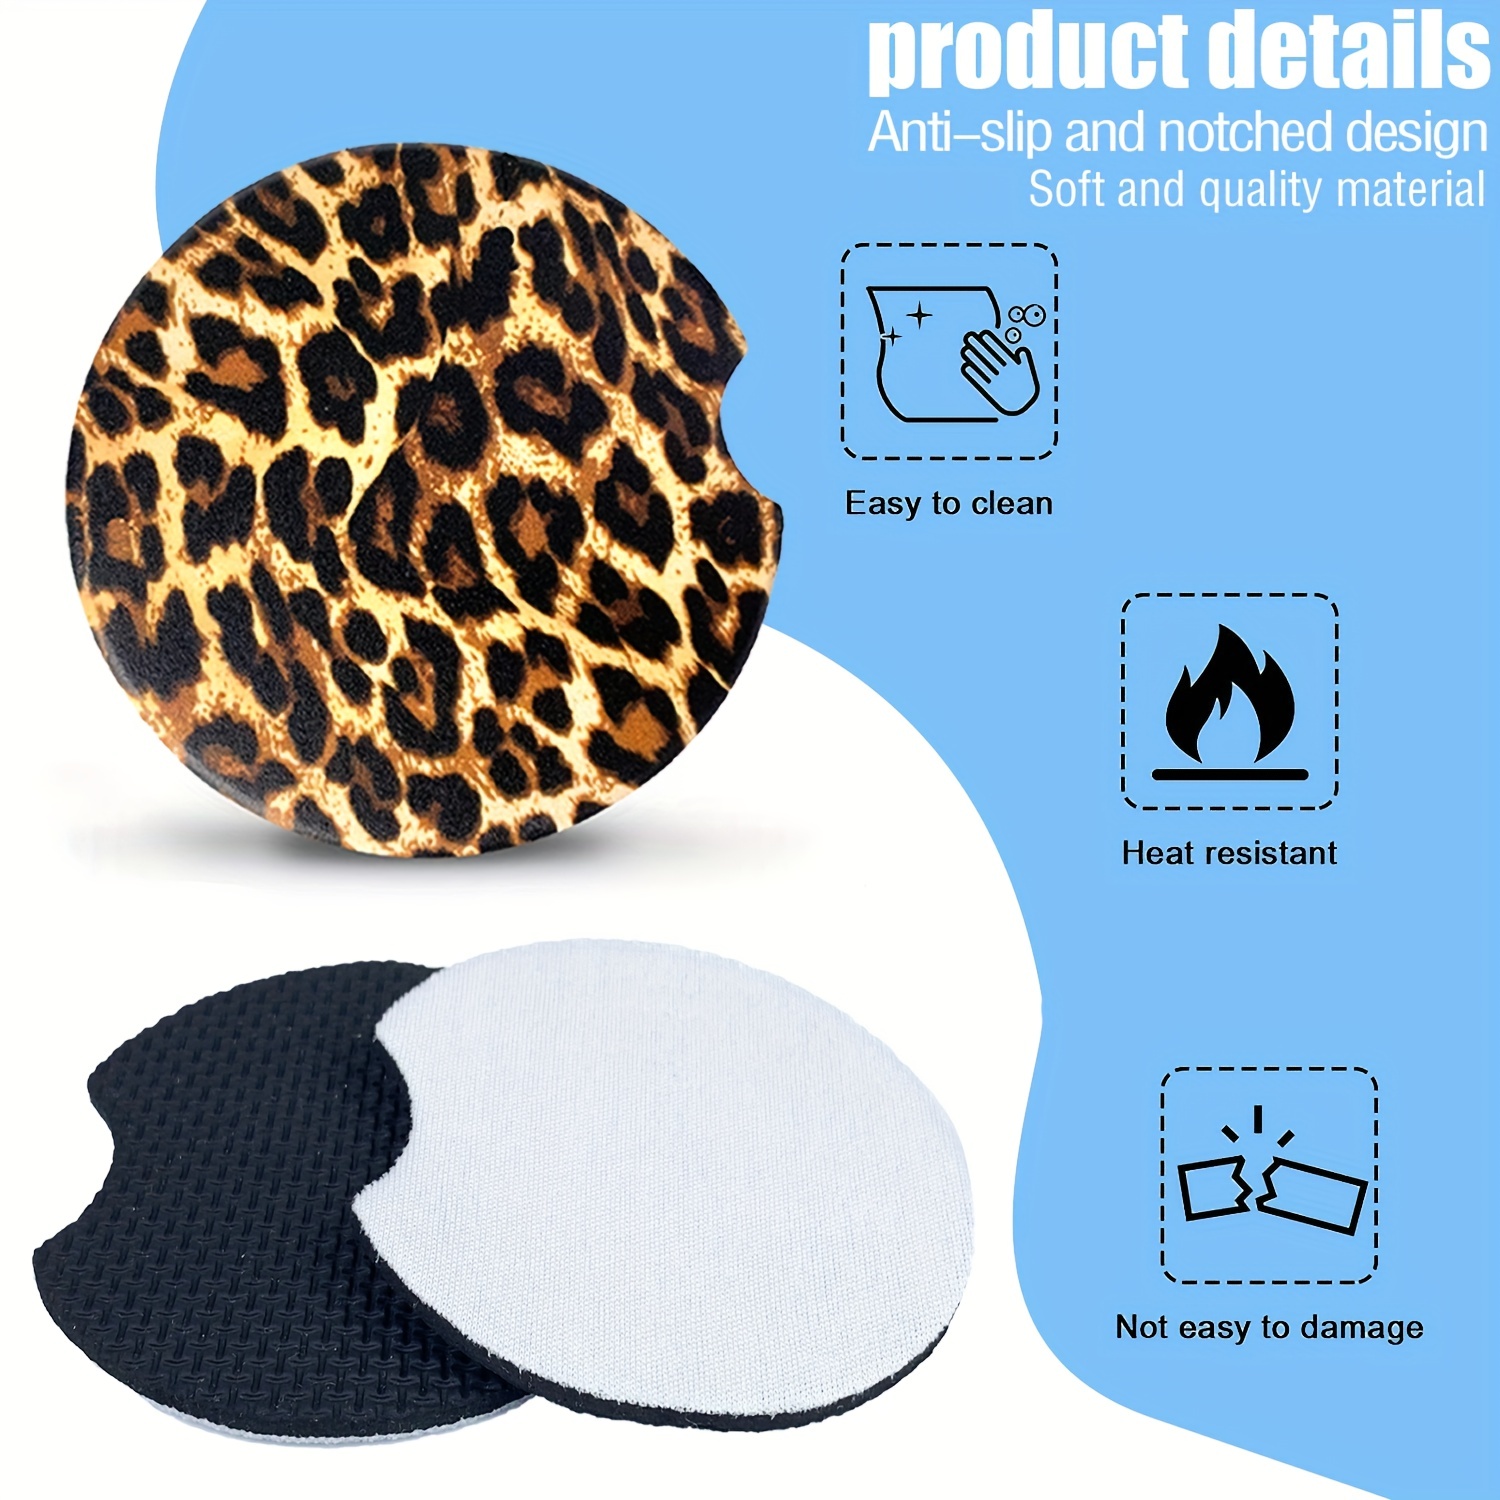  50Pcs Sublimation Blanks Products - Sublimation Cup Coasters  Blanks 2.75 Inch for DIY Crafts Car Cup Coasters Painting Project  Sublimation Accessories : Arts, Crafts & Sewing